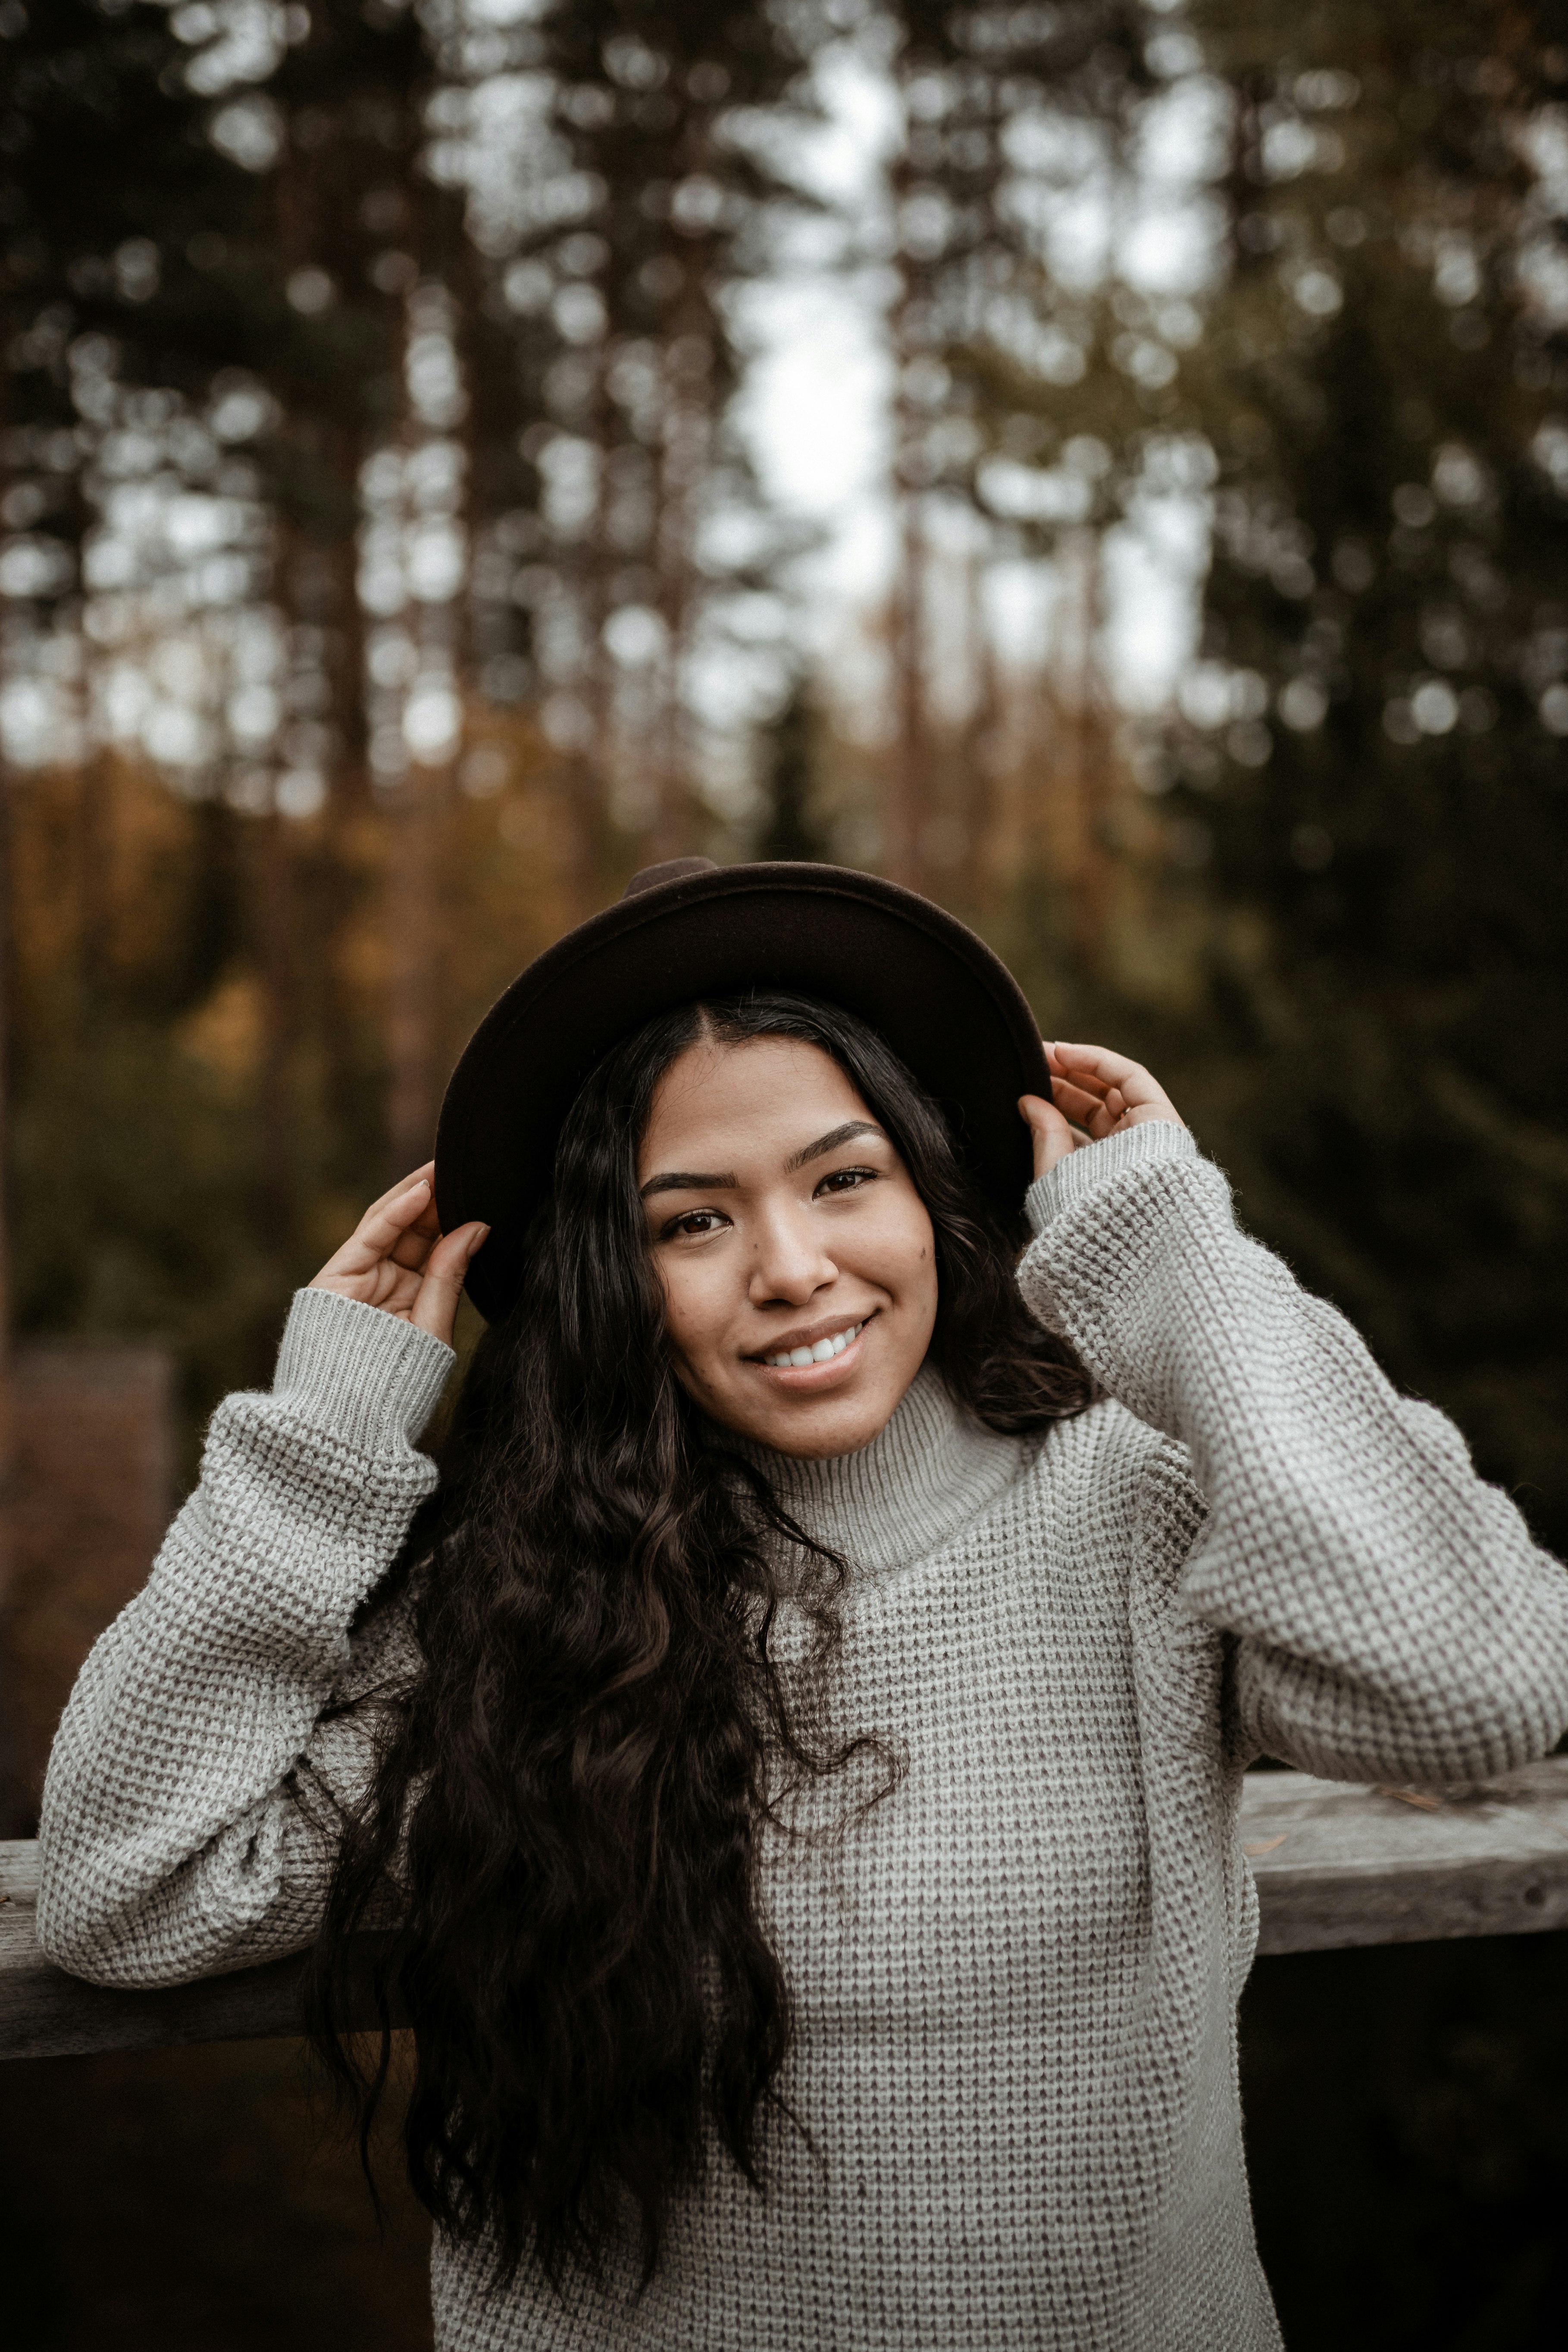 woman in black hat and gray sweater smiling